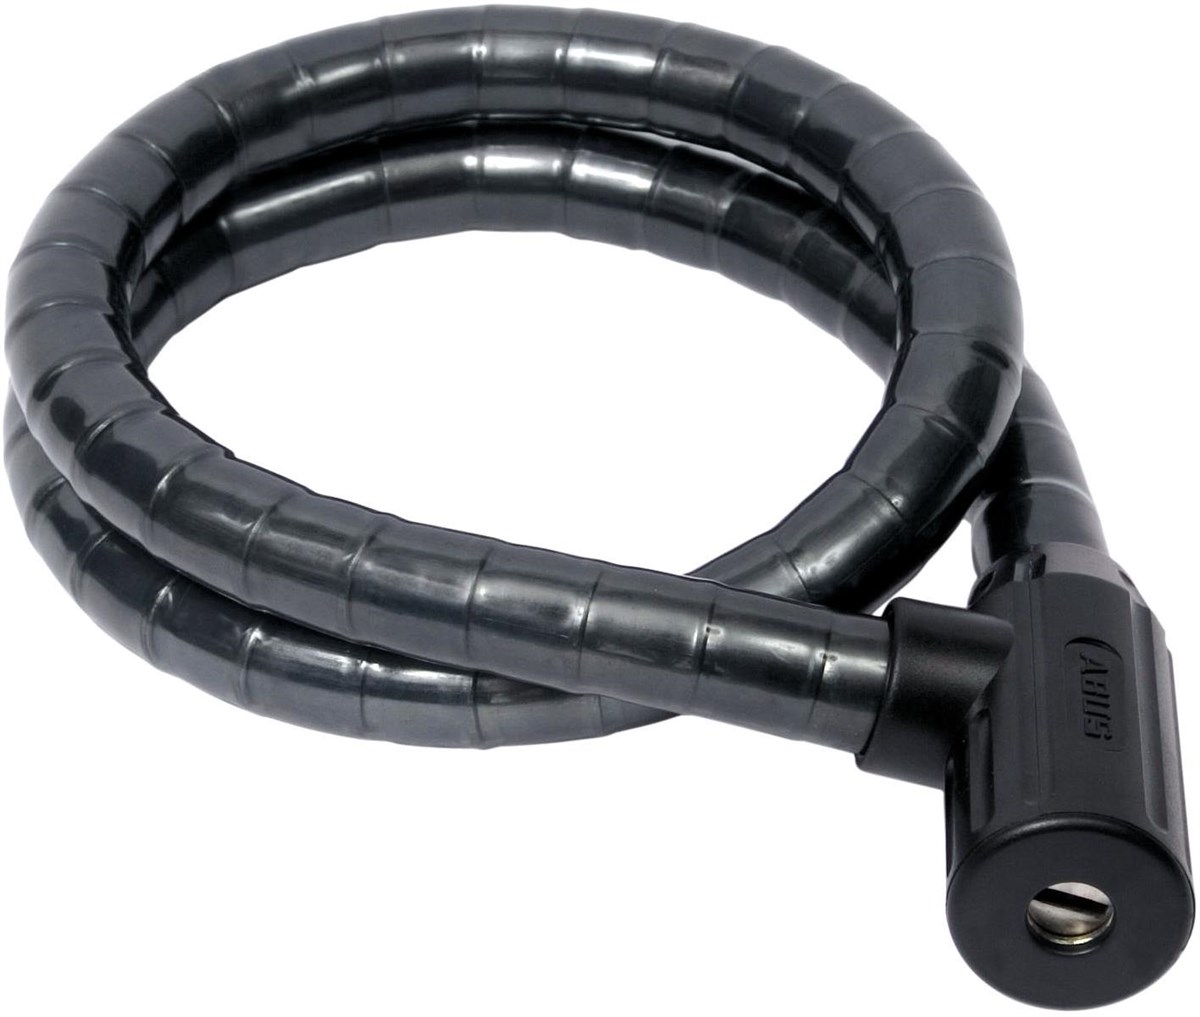 Abus Steel-O-Flex 840 Cable Lock product image